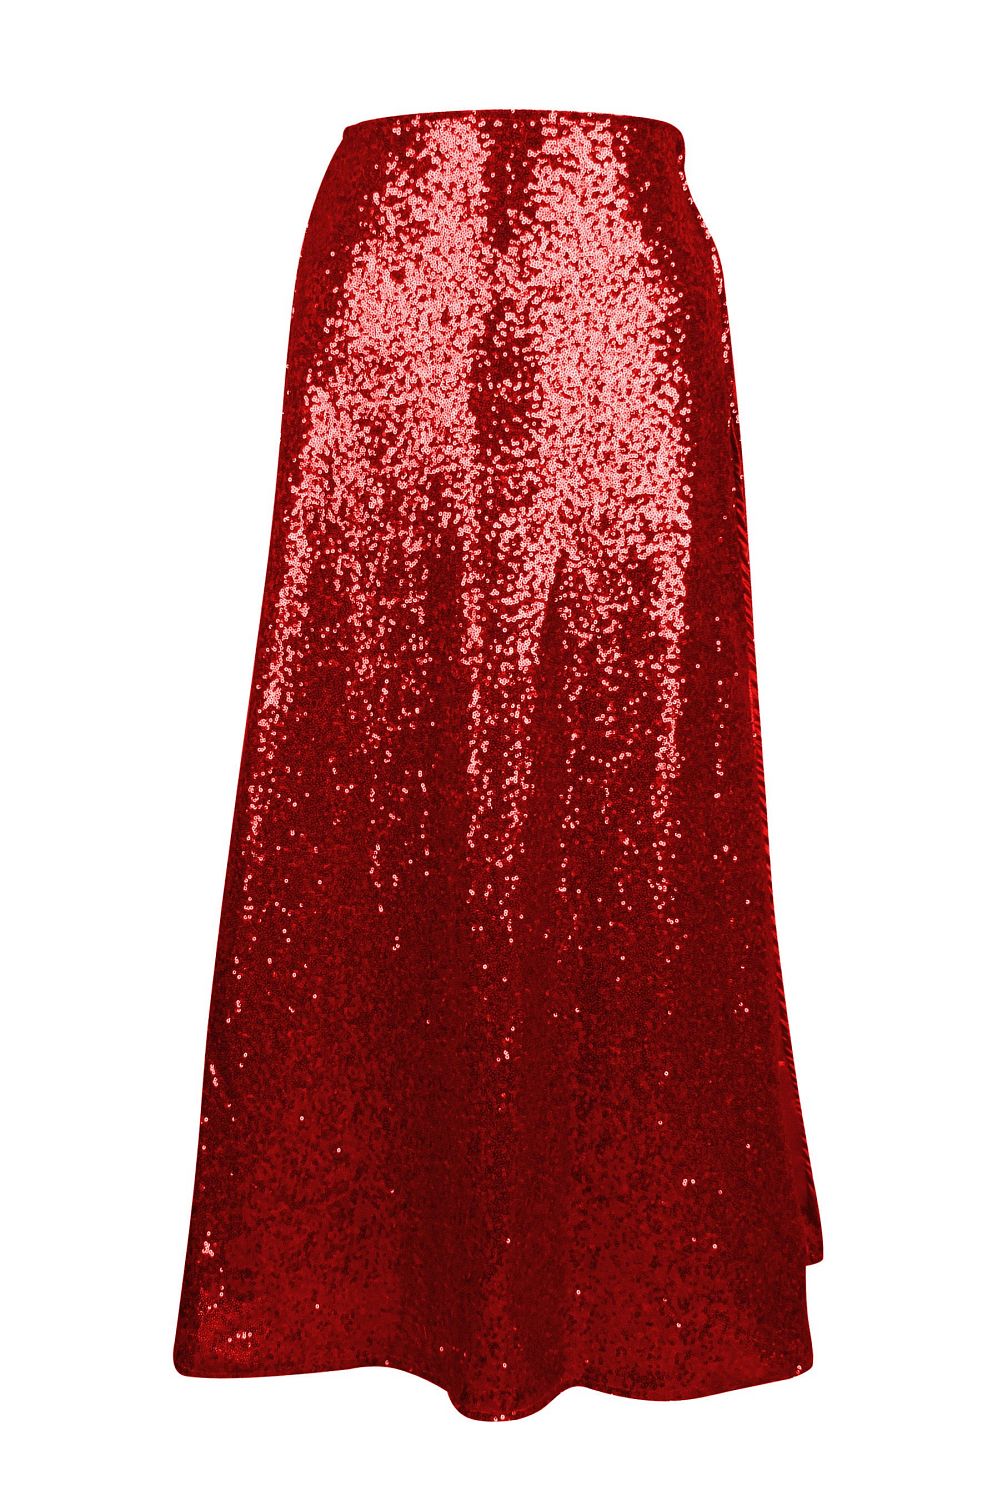 Long Sequin Skirt with Thigh High Slit - Red